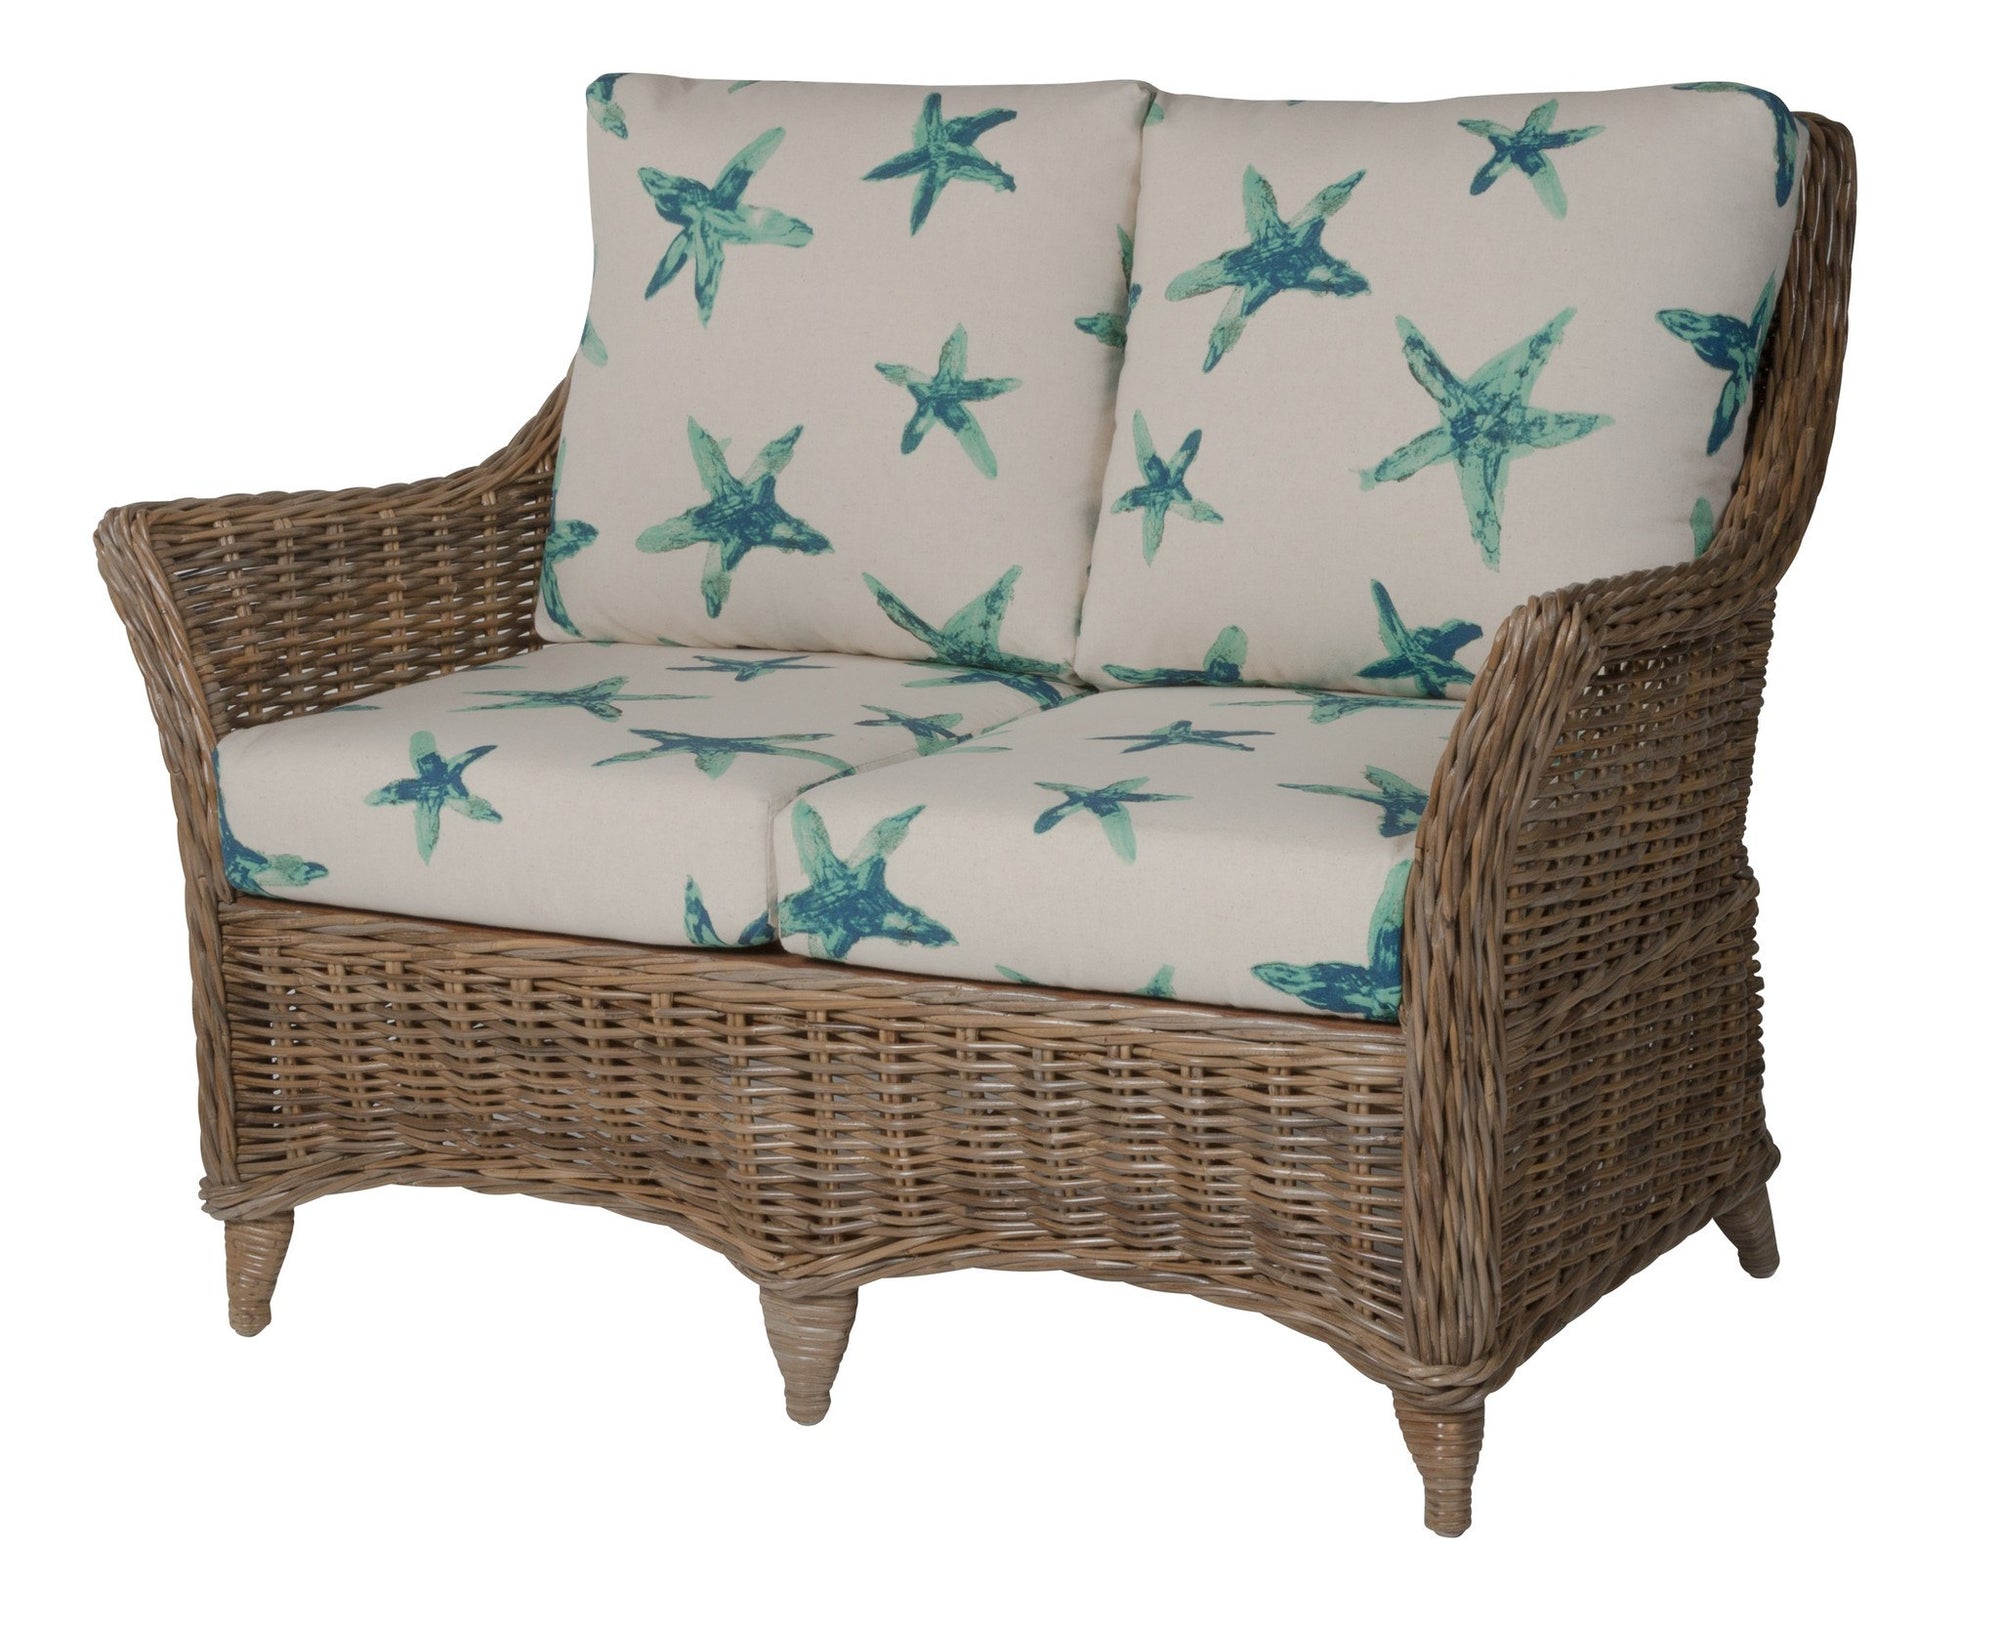 Designer Wicker & Rattan By Tribor Conservatory Loveseat by Designer Wicker from Tribor Loveseat - Rattan Imports